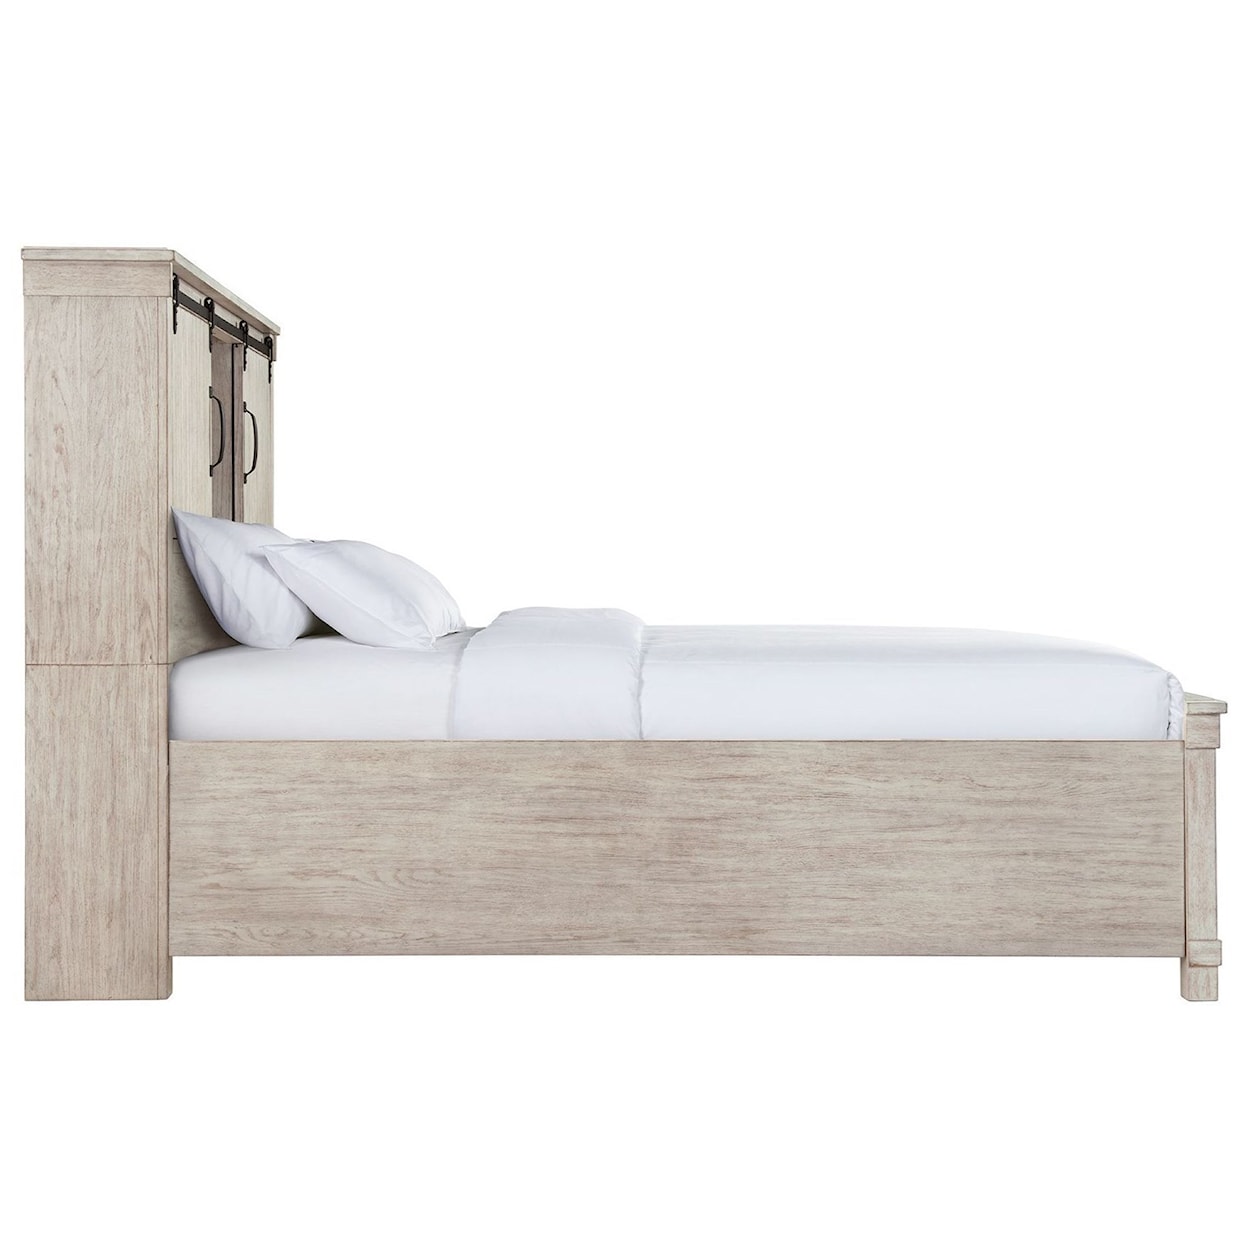 VFM Basics Fulton Queen Bed with Storage